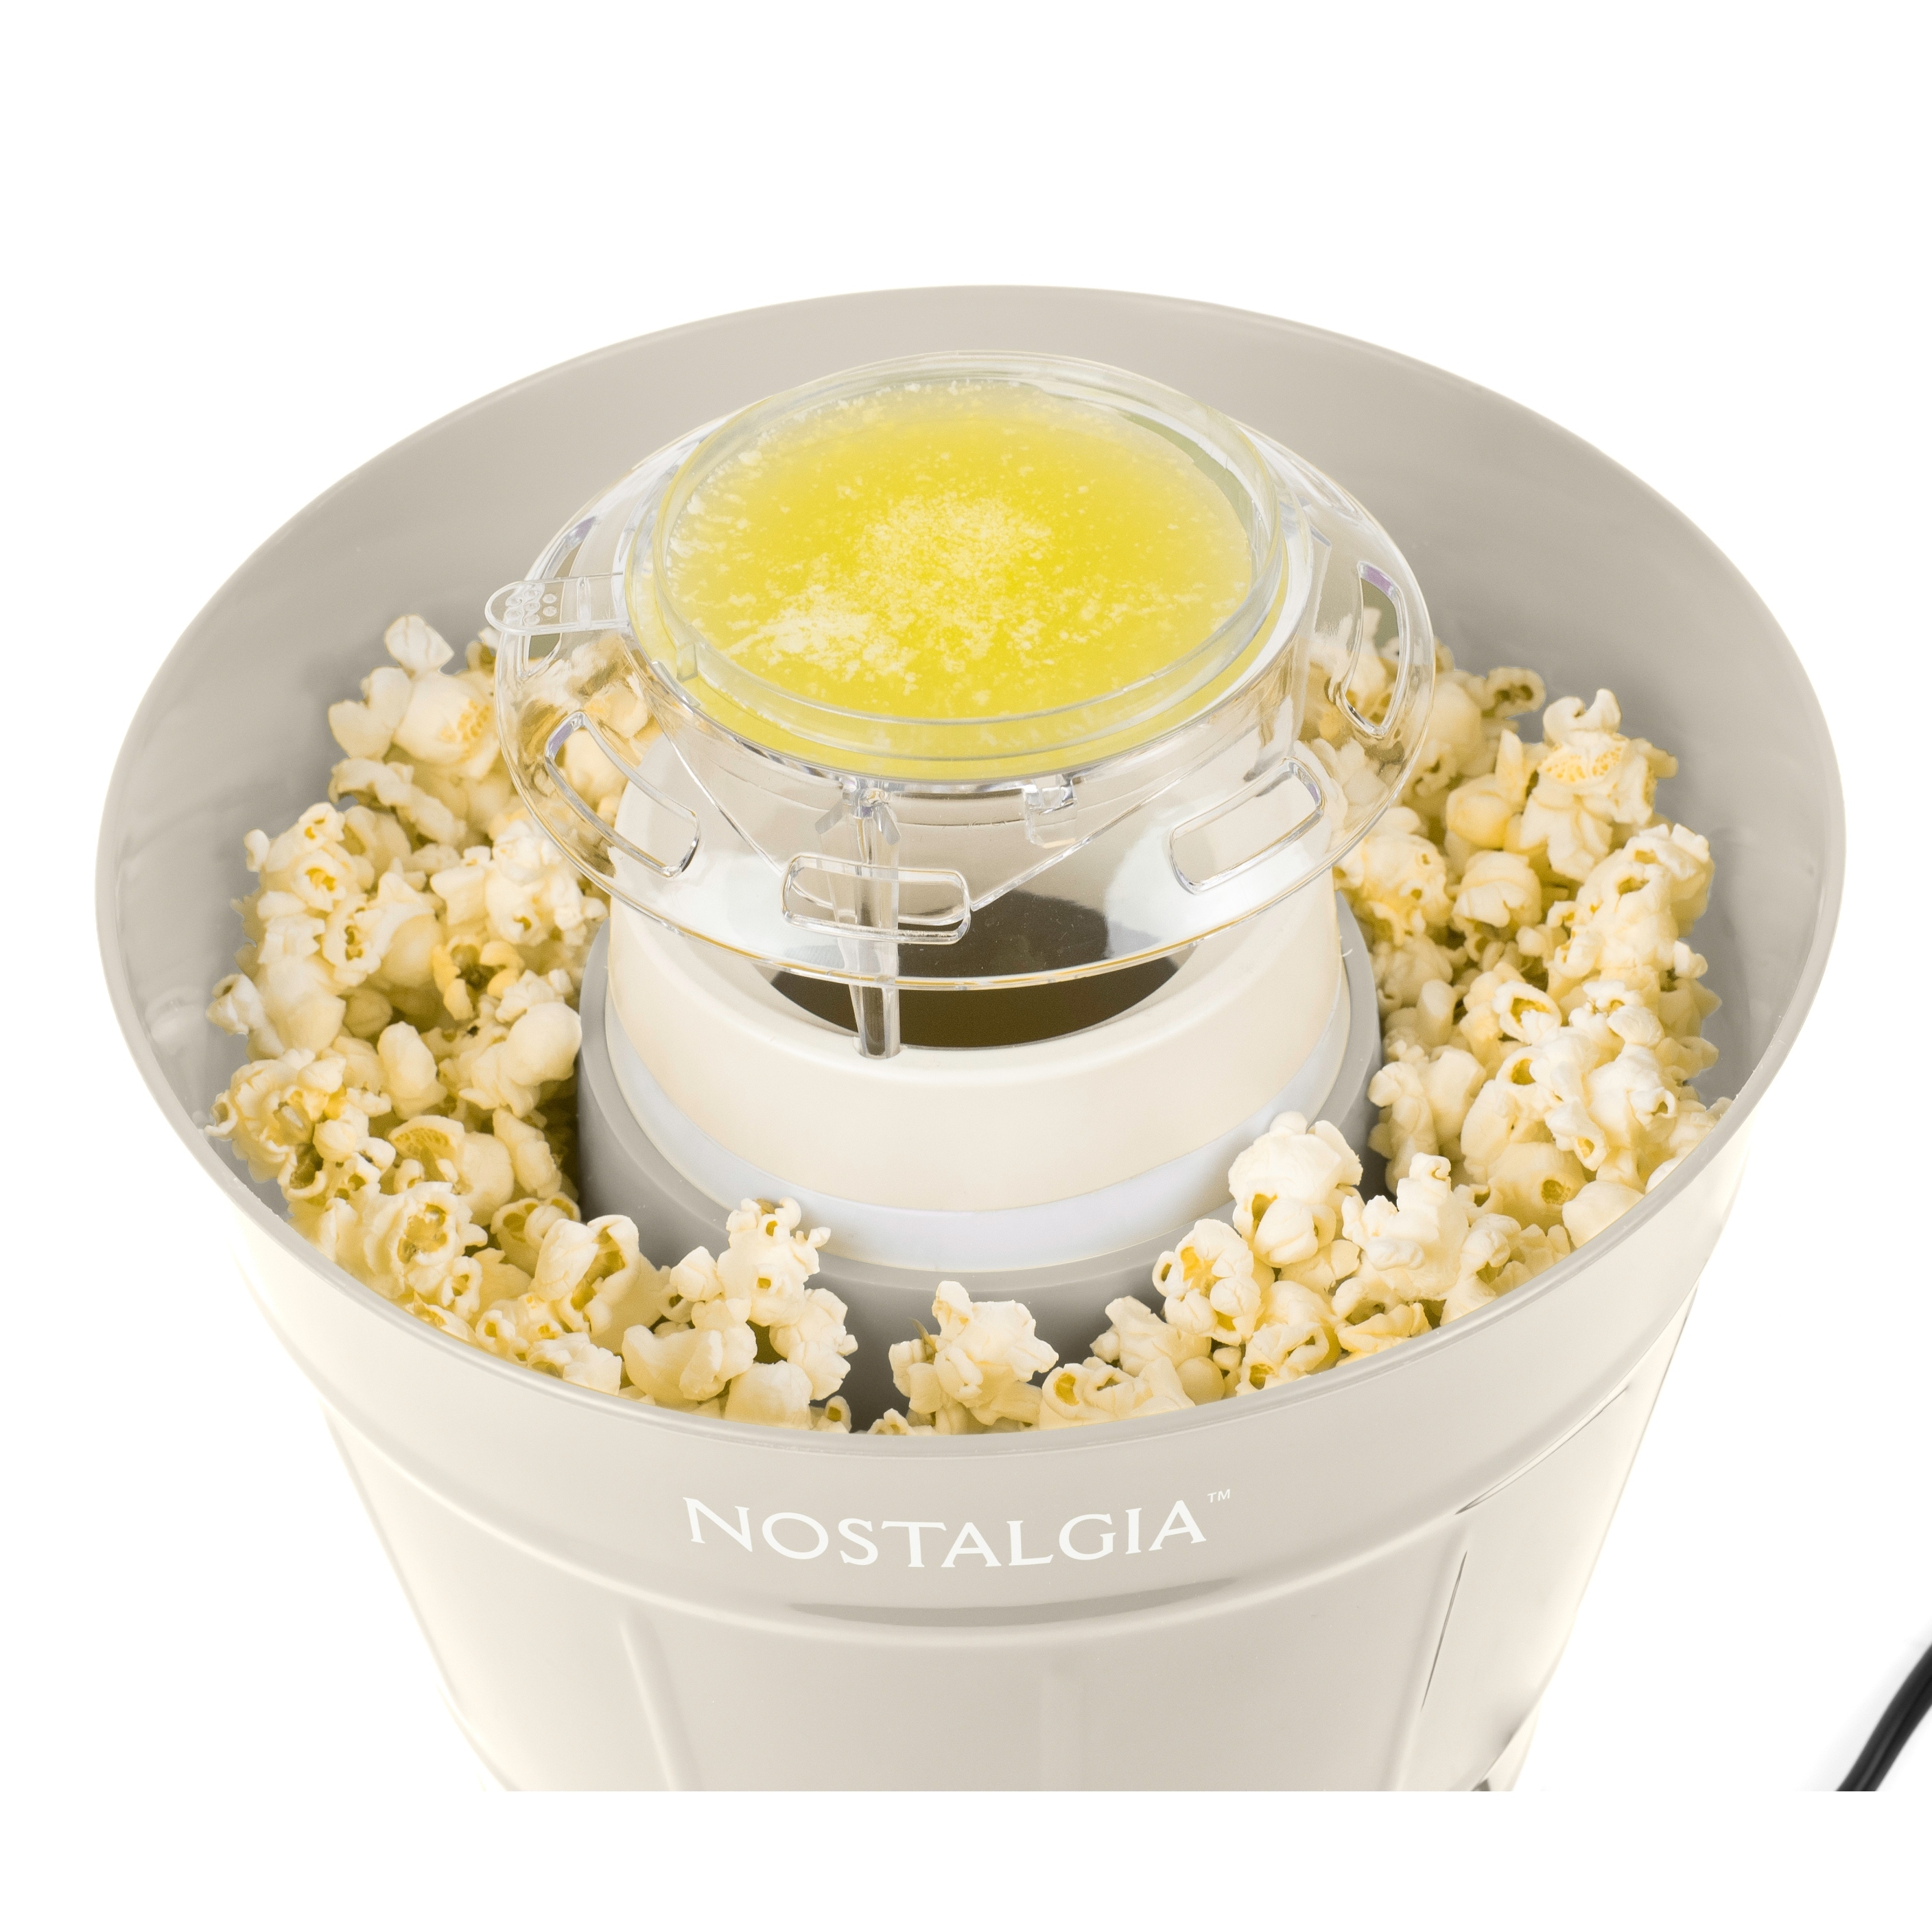 https://ak1.ostkcdn.com/images/products/is/images/direct/65f78ca36558abb5f75407df4553d0ca81121e64/Nostalgia-Hot-Air-Popcorn-Maker-and-Bucket.jpg